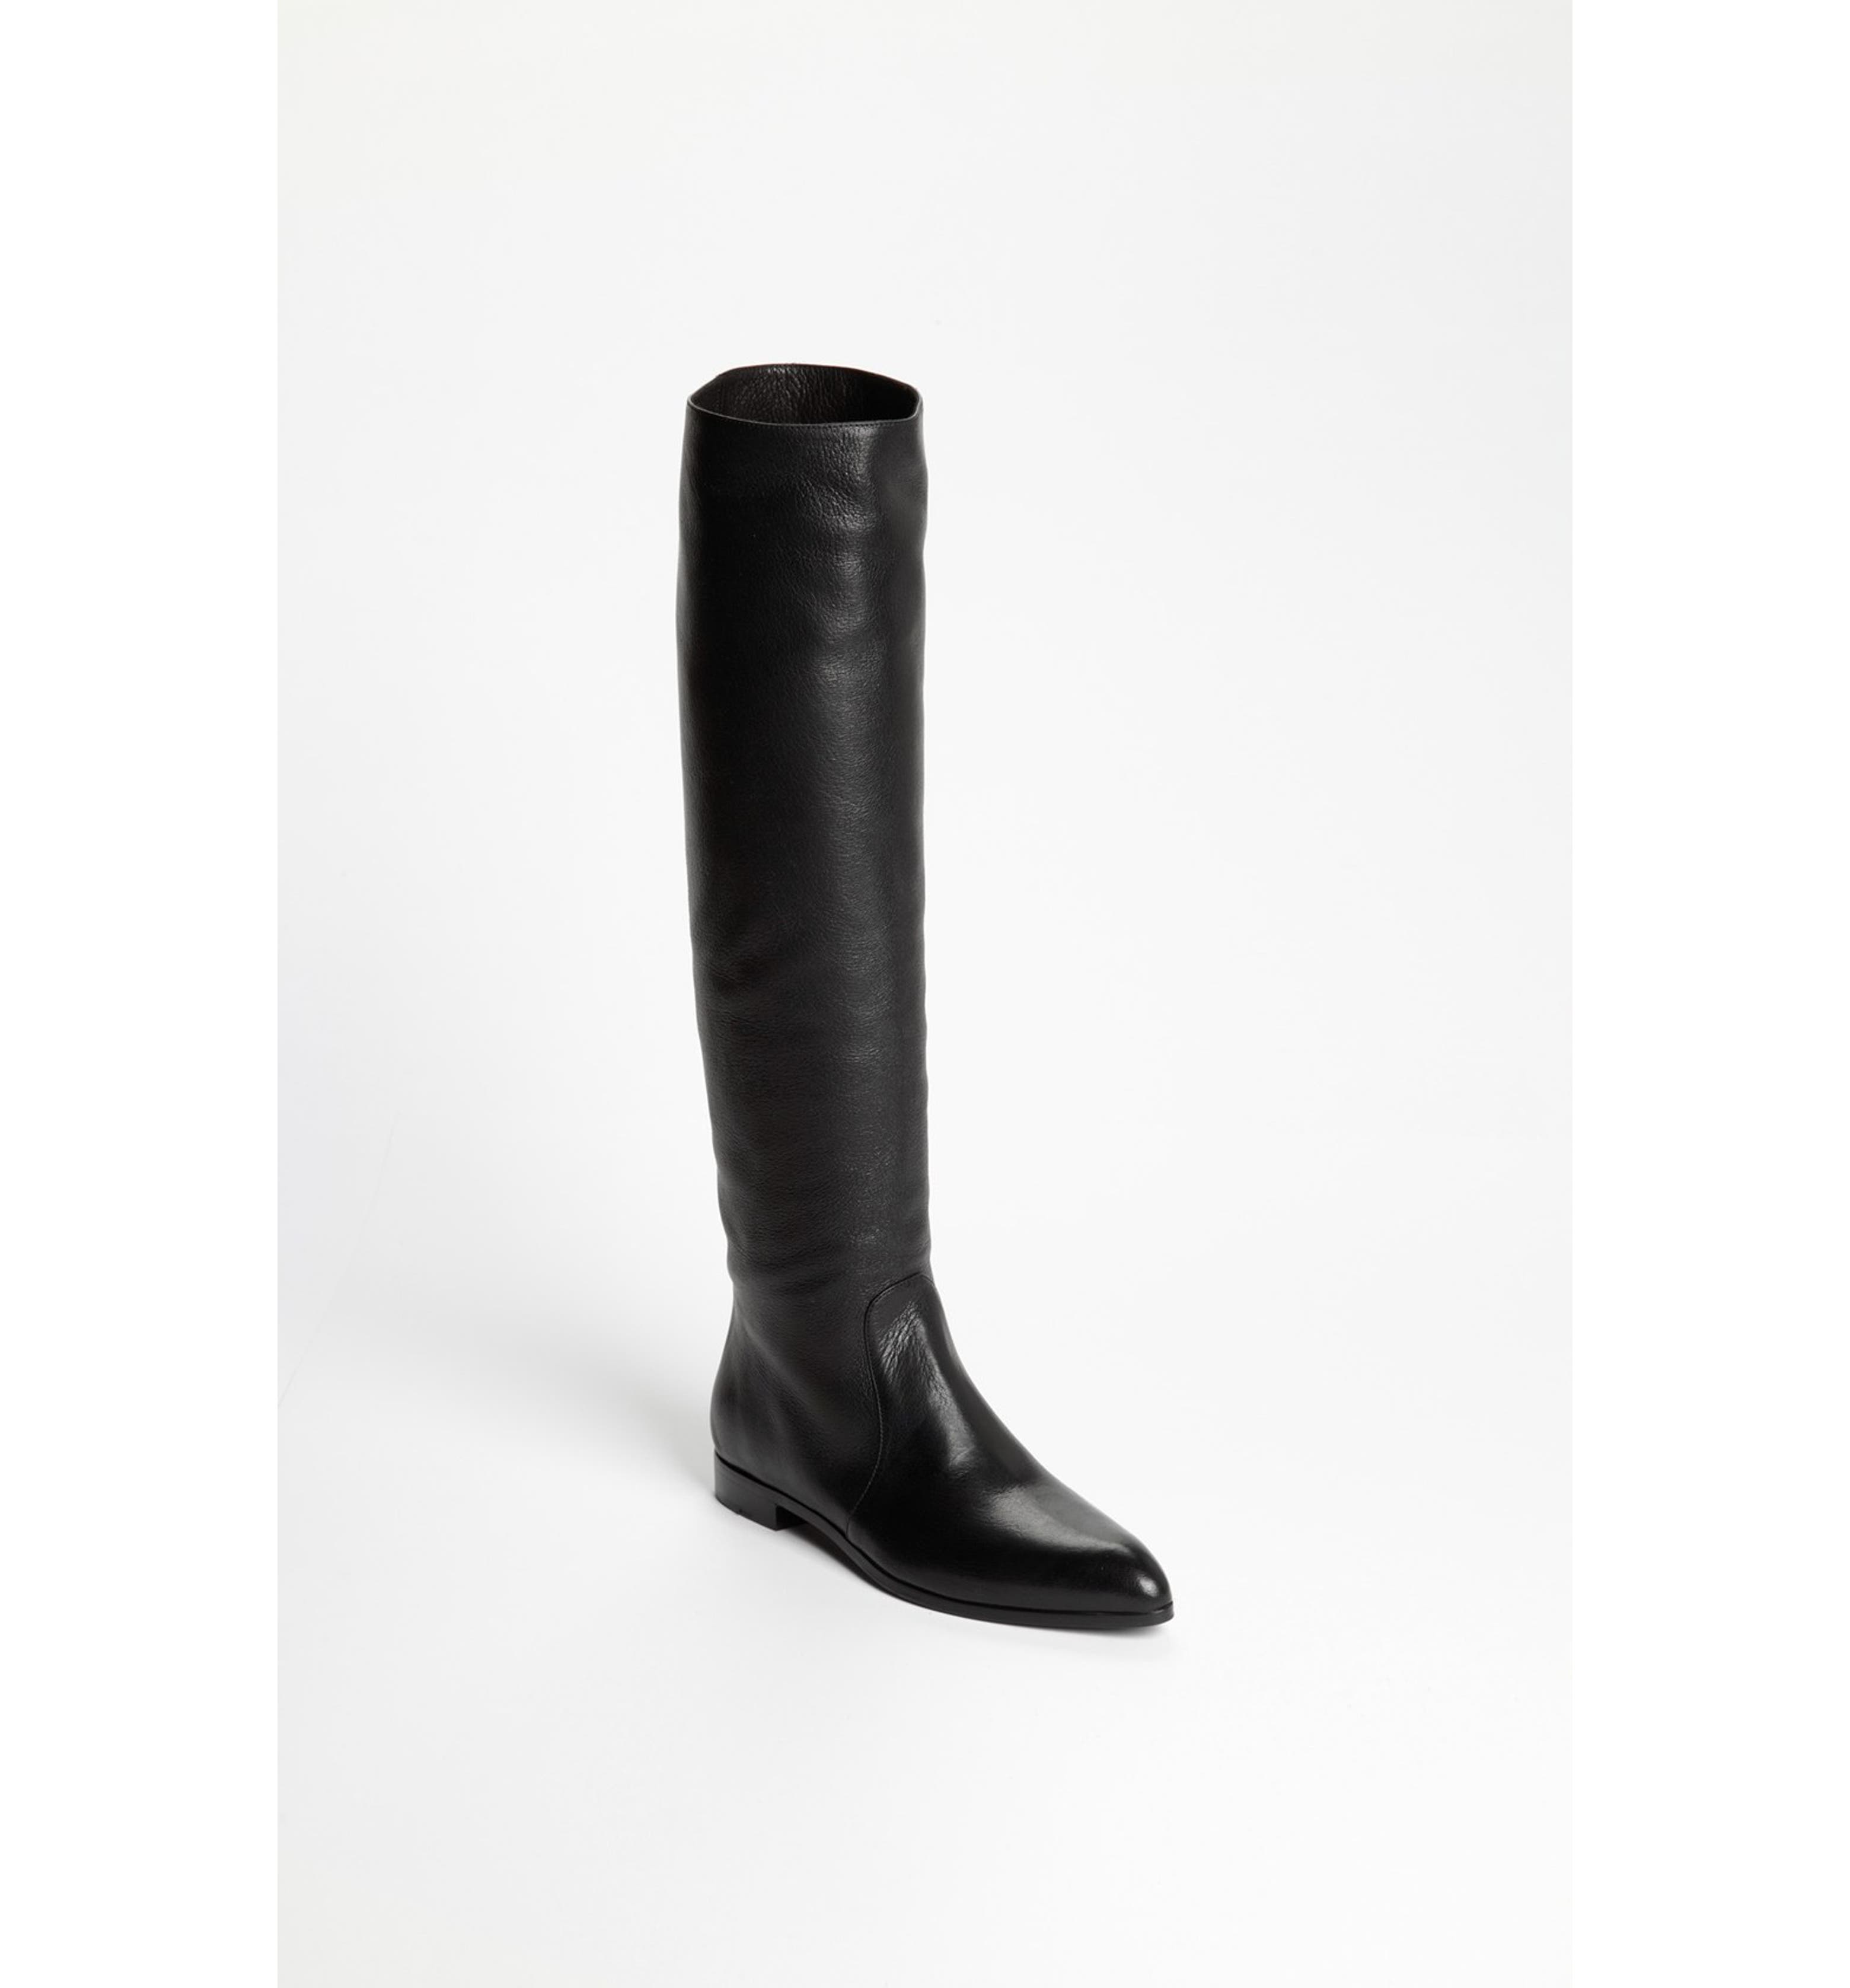 Prada Pointy Toe Over the Knee Boot | Nordstrom